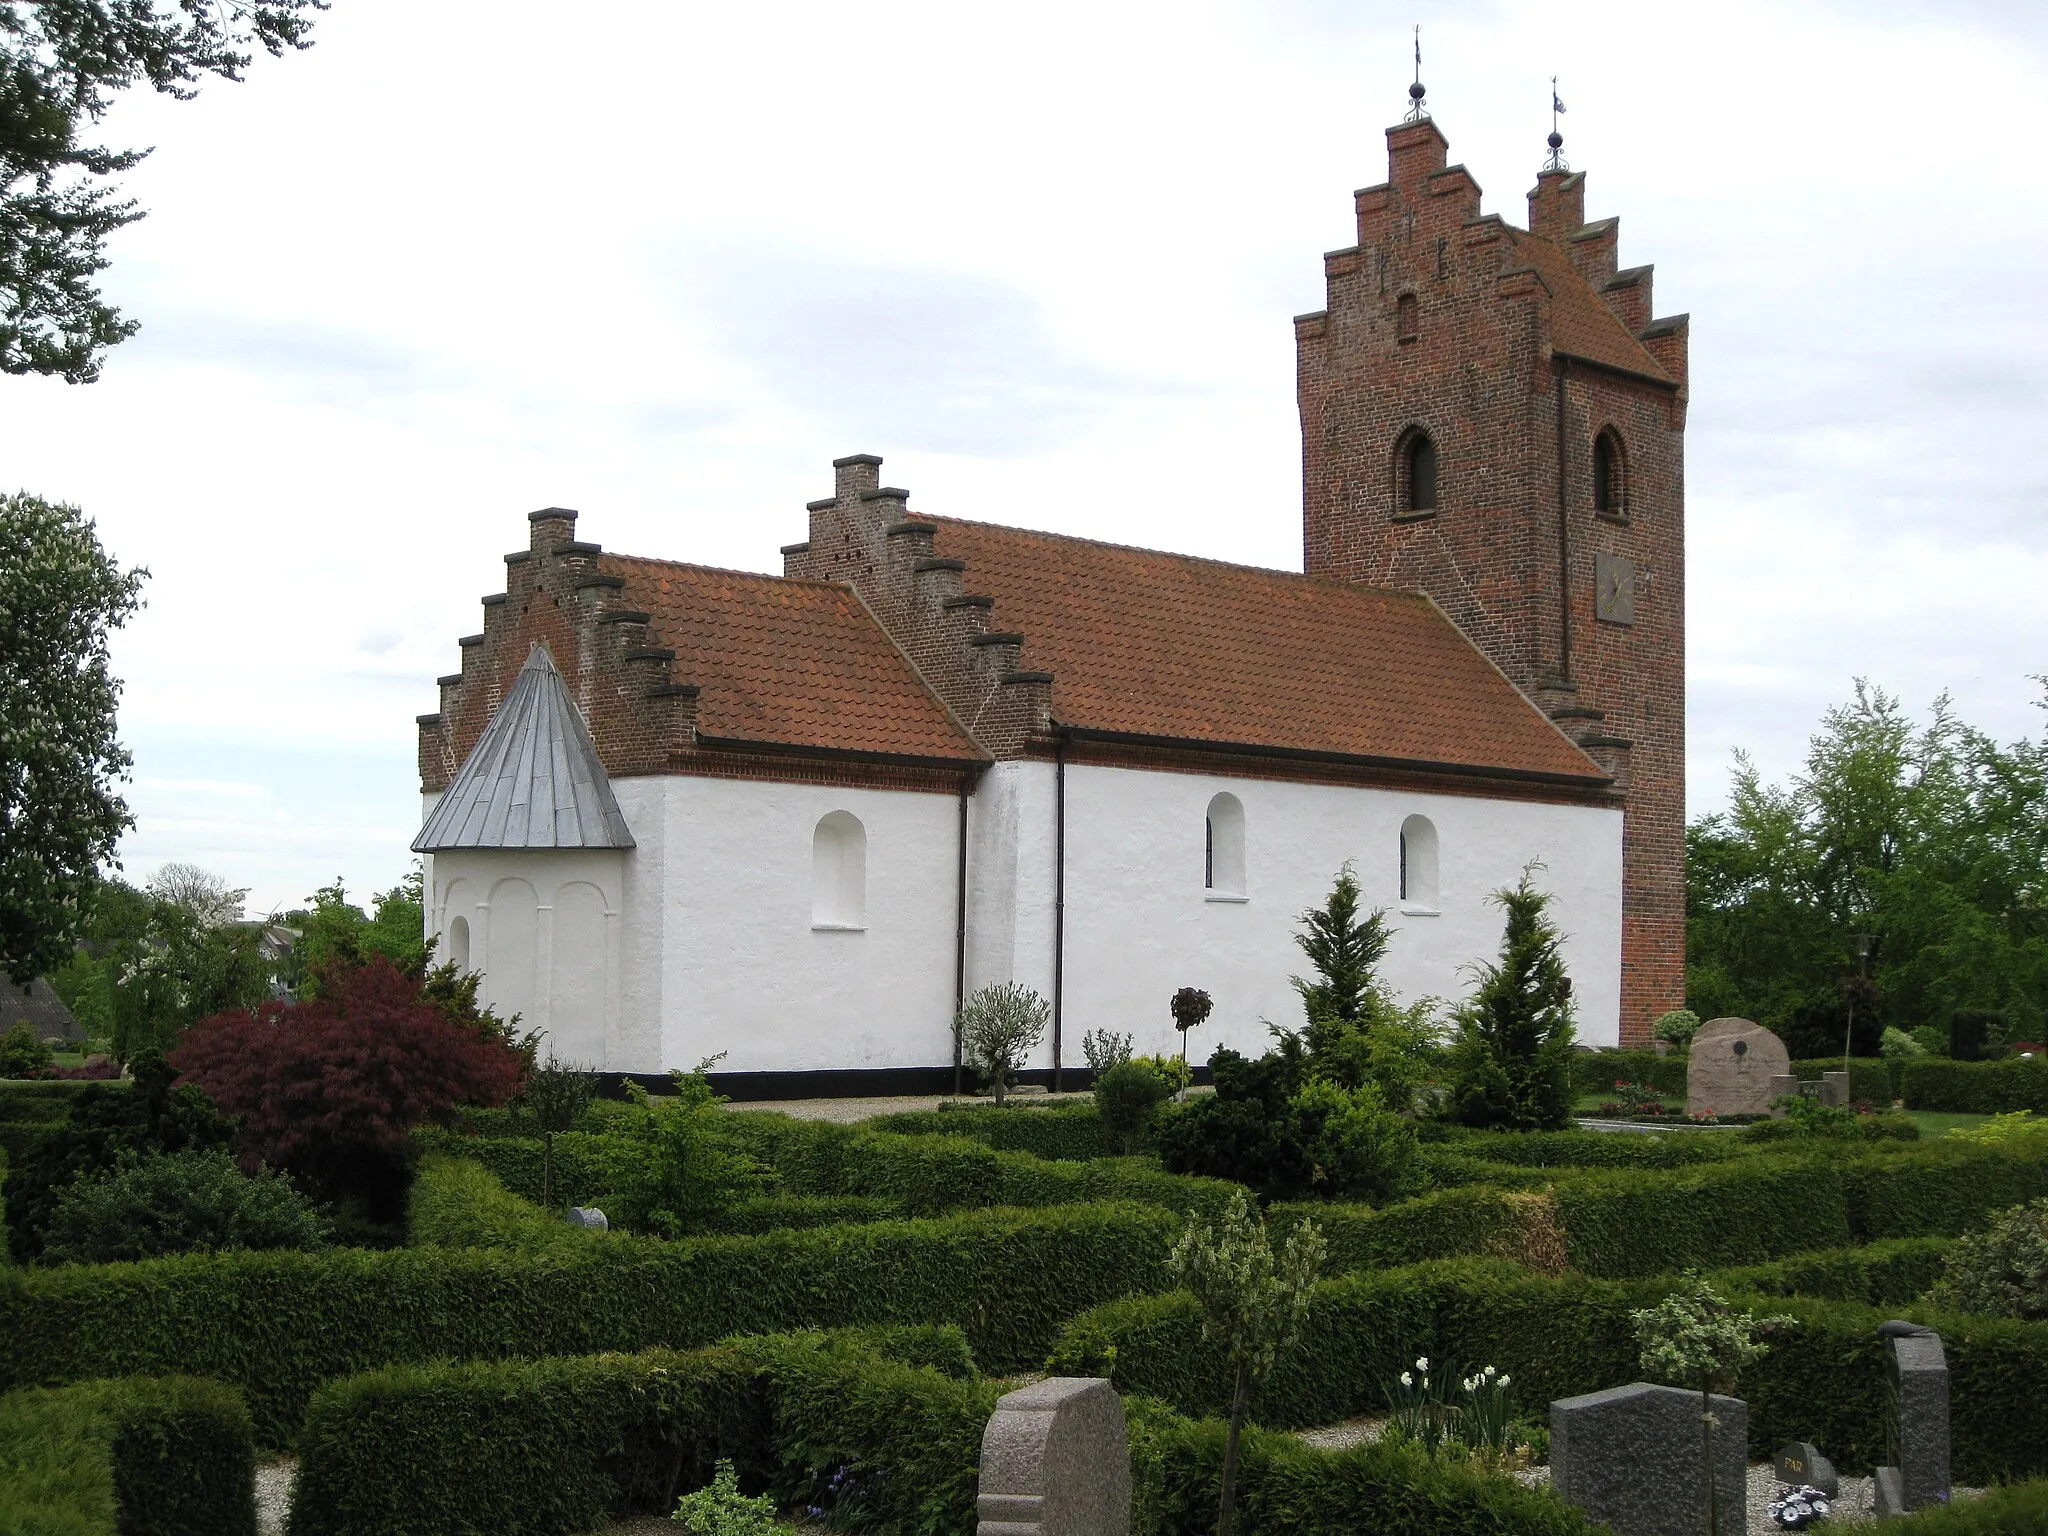 Photo showing: The church "Thorsø Kirke" in the small town "Thorsø". The town is located in East Jutland, Denmark.